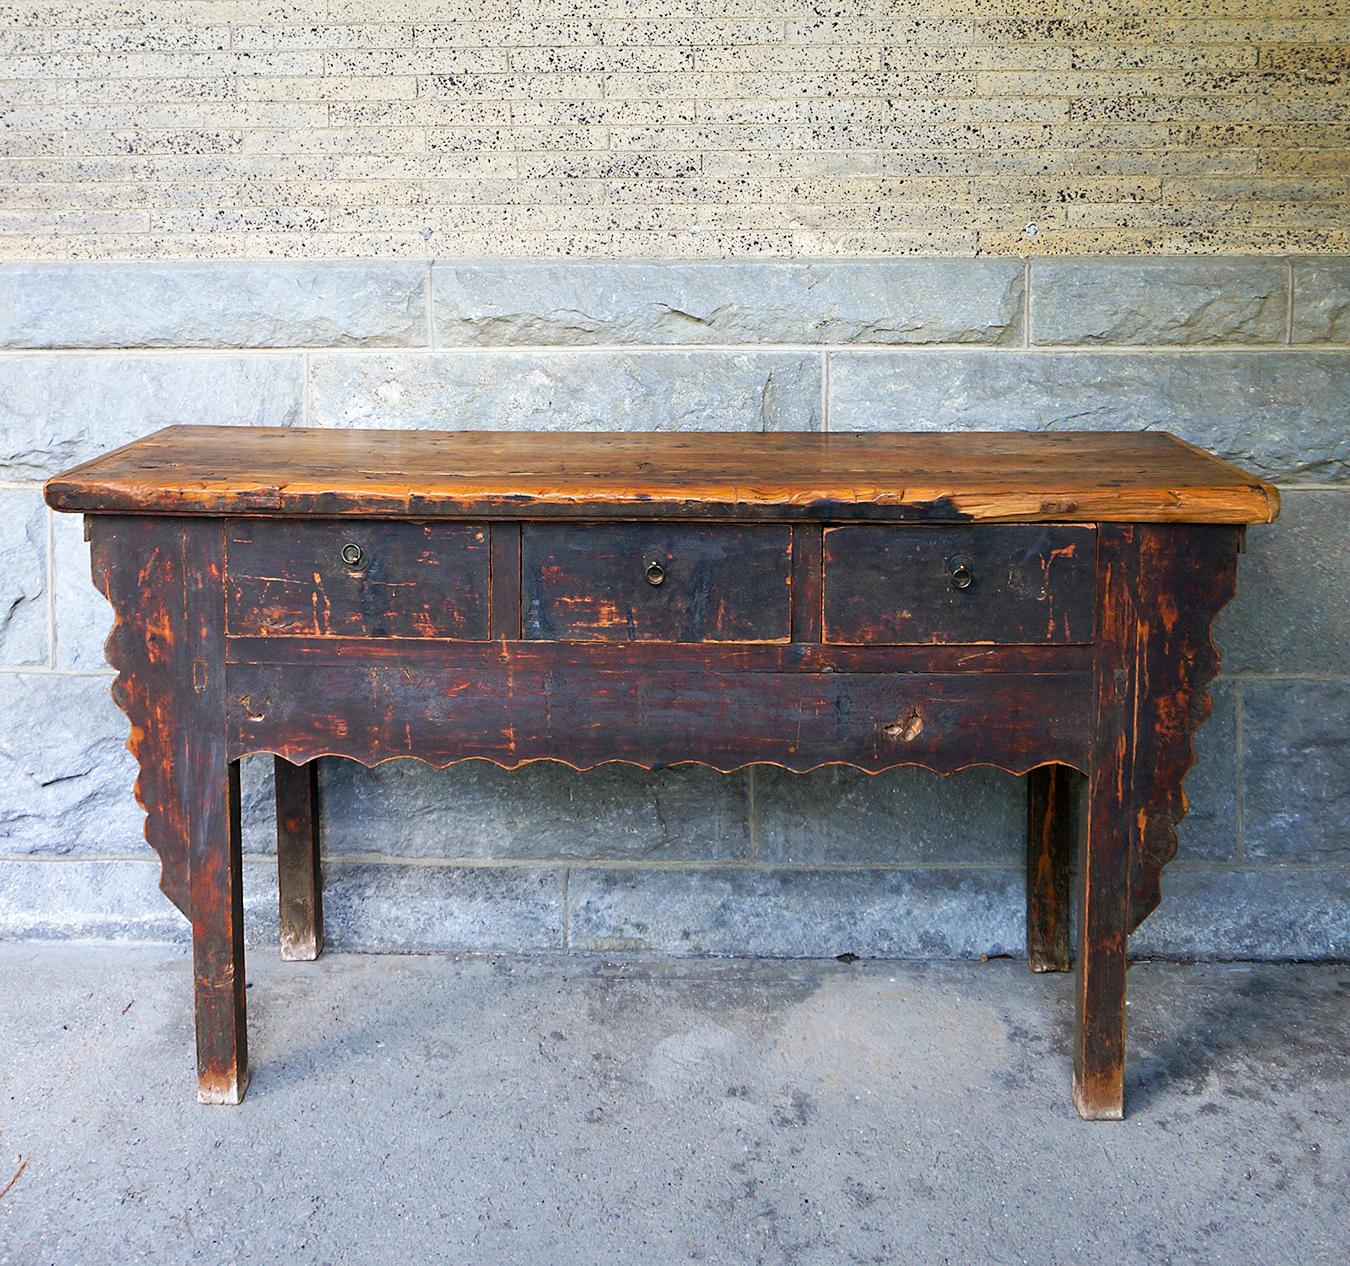 Rustic country style Chinese altar table or sideboard, circa 1780, with three drawers. The straight-forward lines are elevated with the carved decorative brackets and apron. The top is made of three boards with breadboard ends. and the entire piece